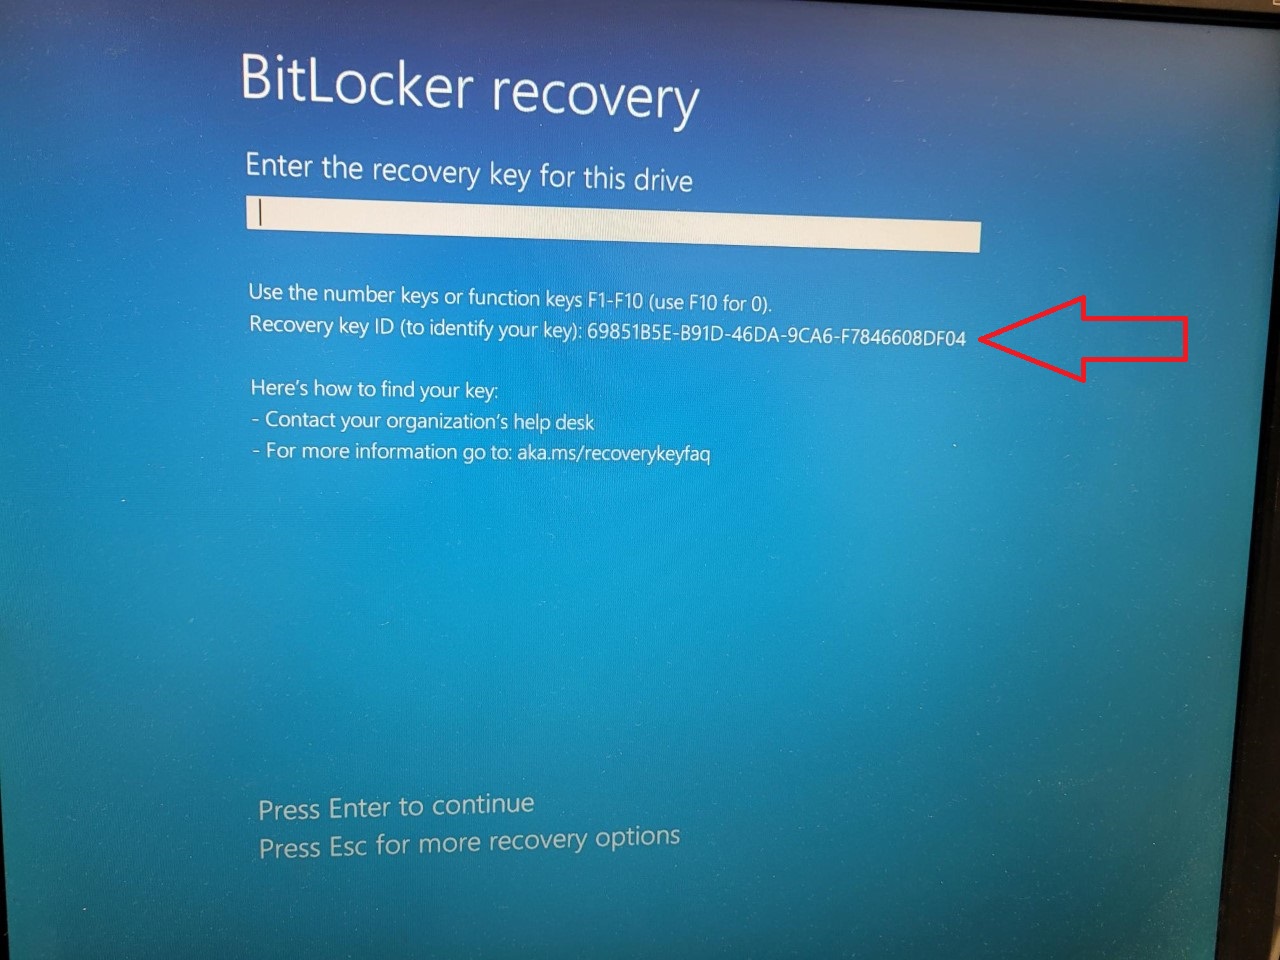 Get the Recovery Key ID